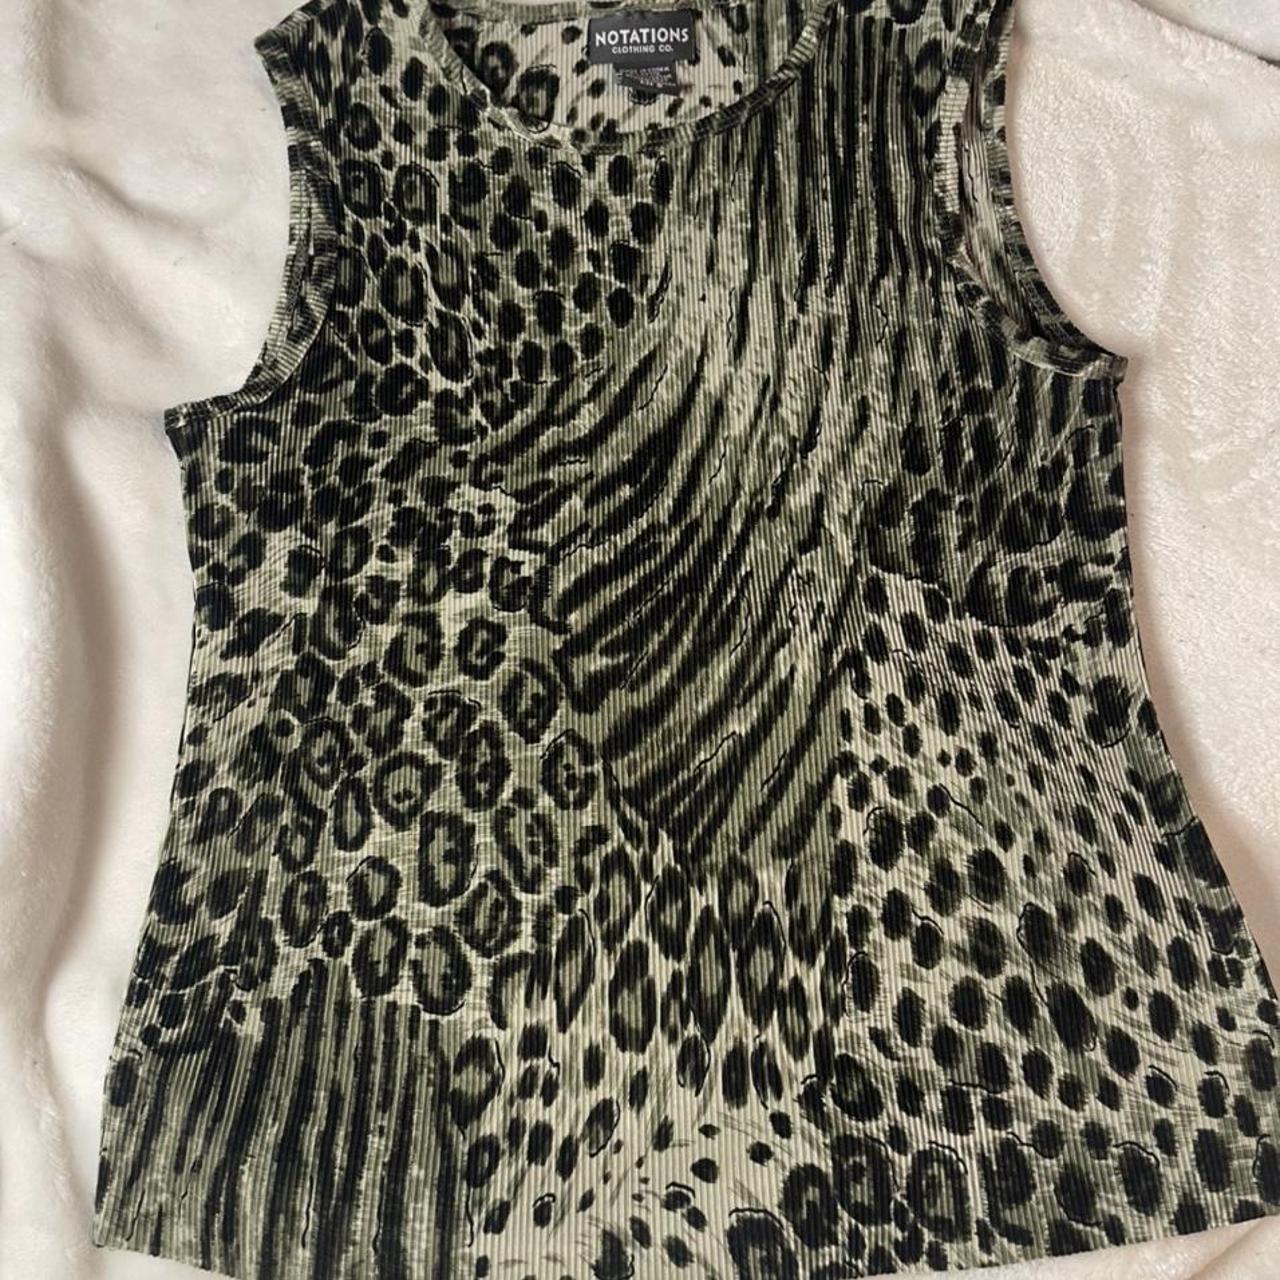 - NOTATIONS CLOTHING CO. MULTI ANIMAL PRINT TOP 🦓... - Depop